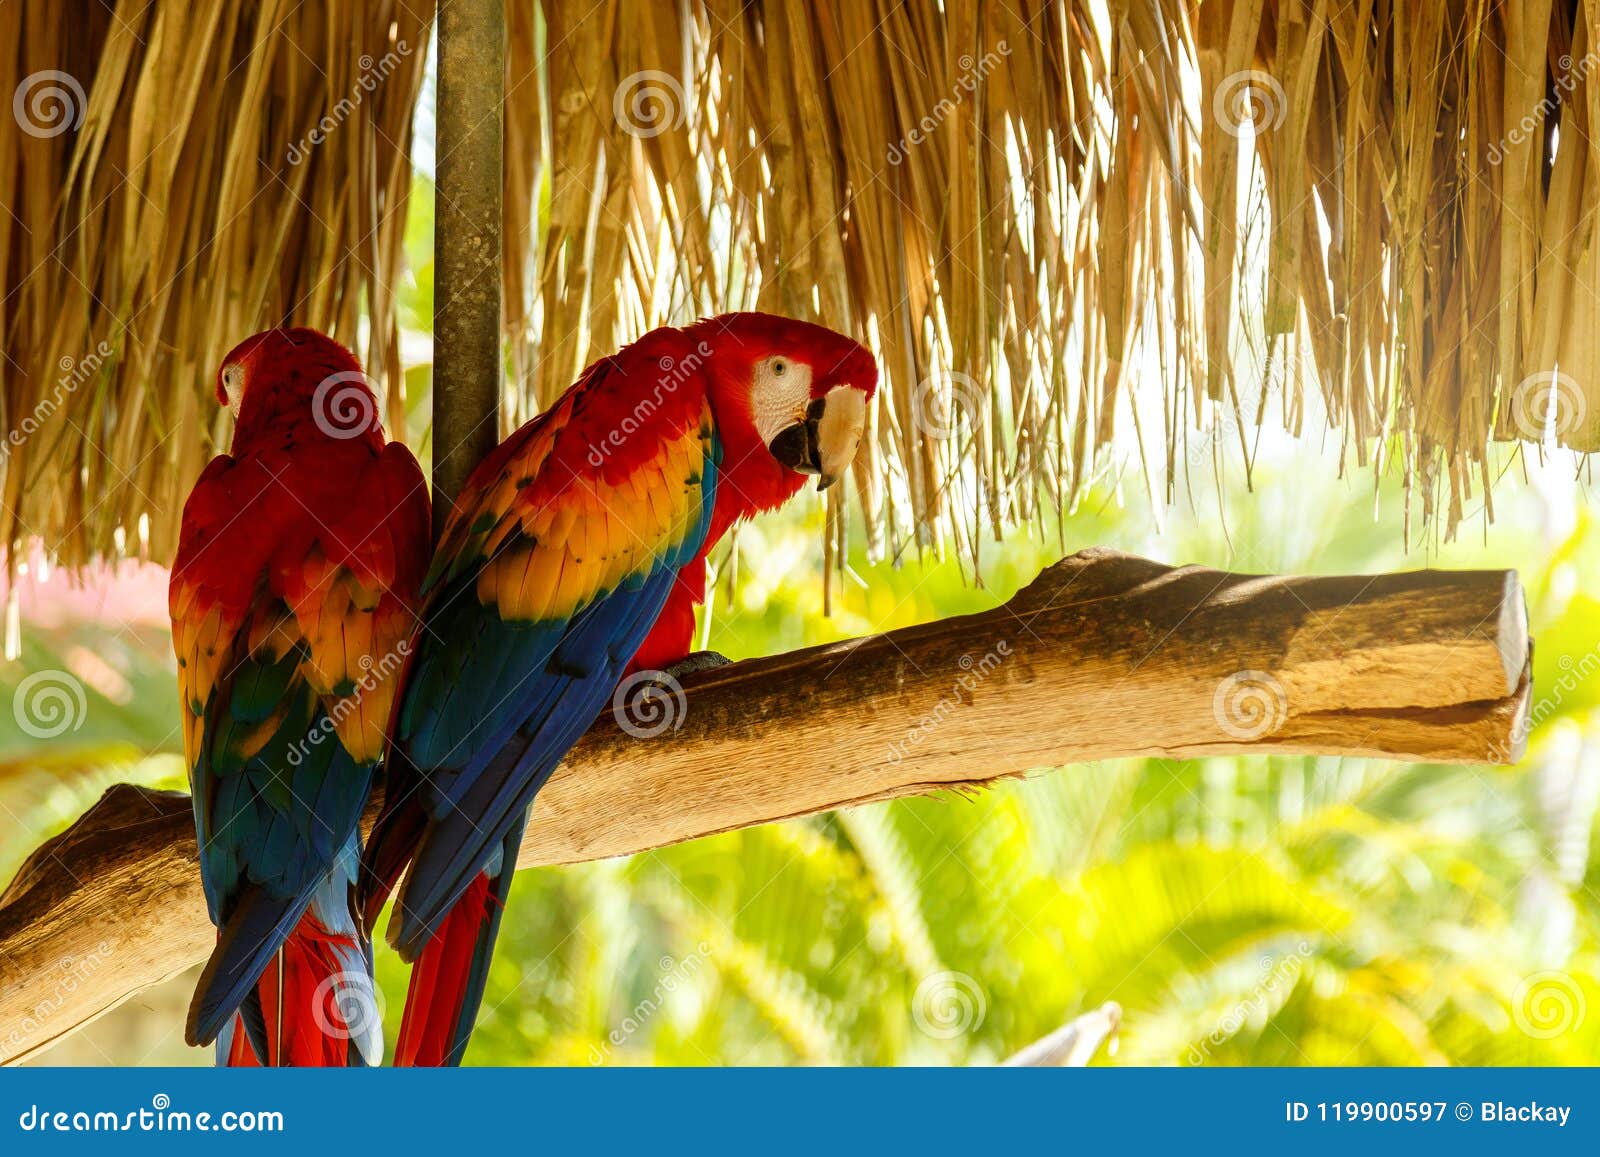 two beautiful macaw parrots